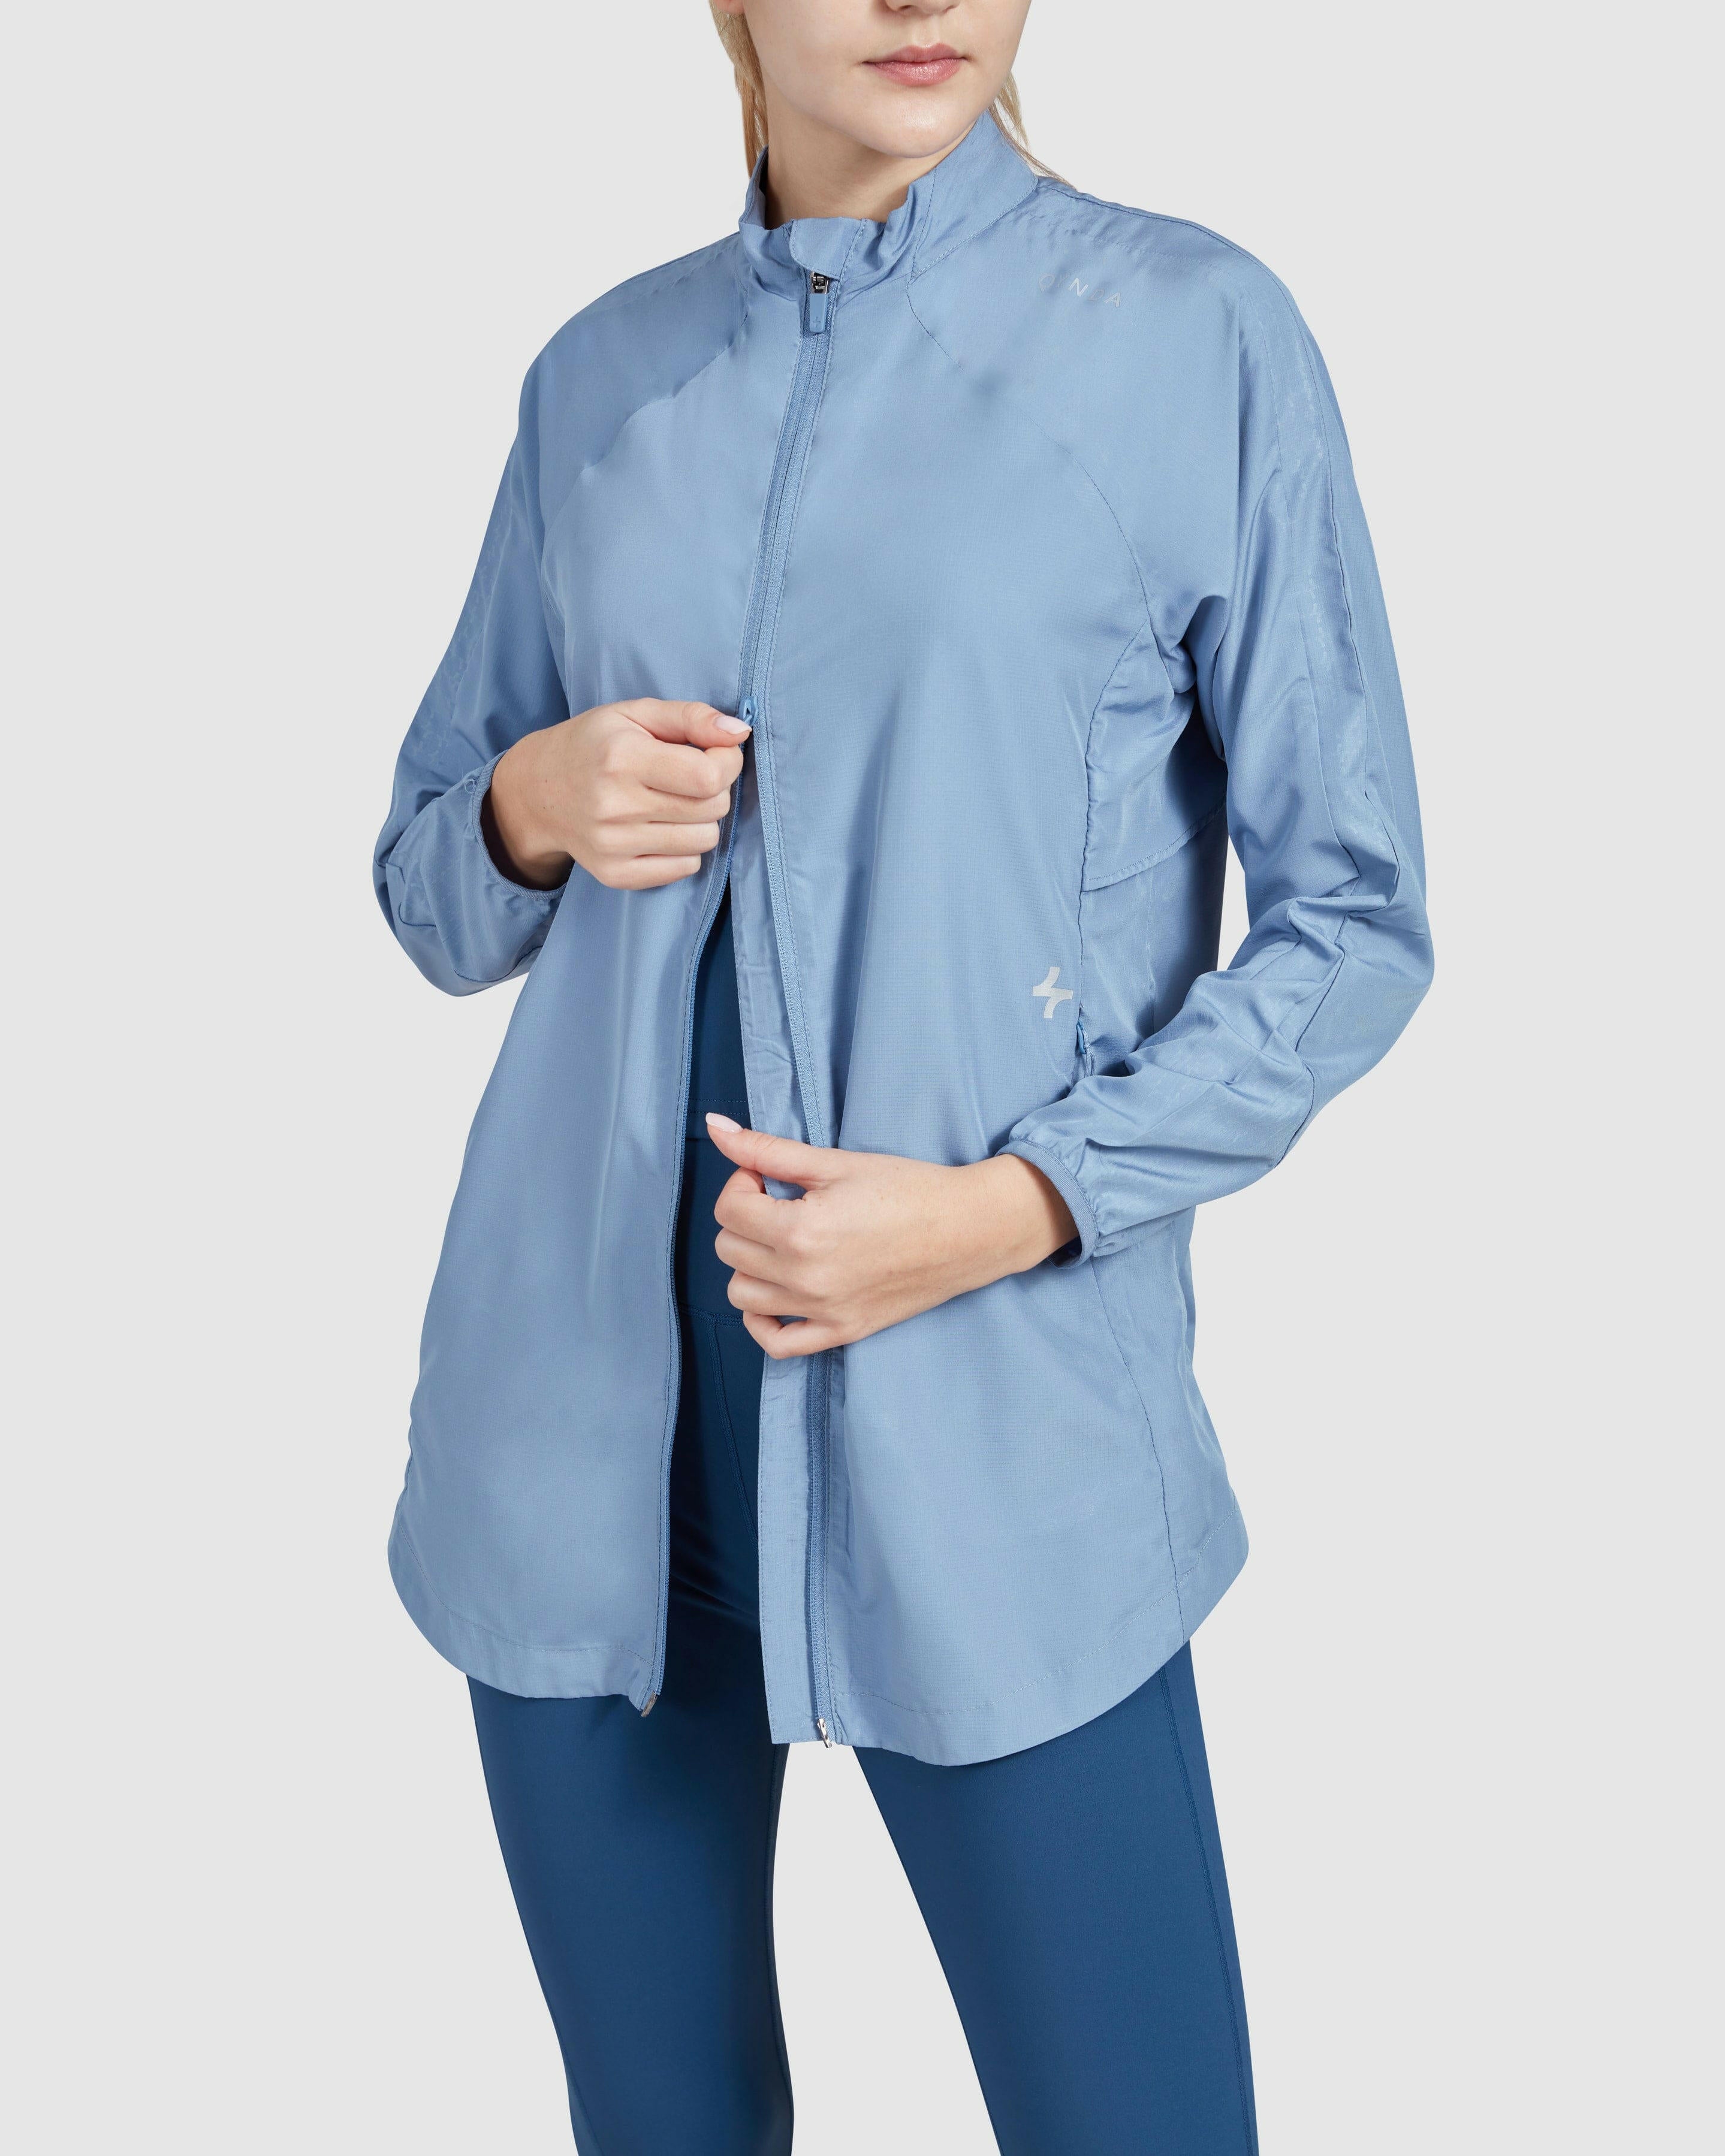 A woman is modeling an Infinity Blue, athletic zip-up FLY JACKET with a high collar, showcasing its style and fit.